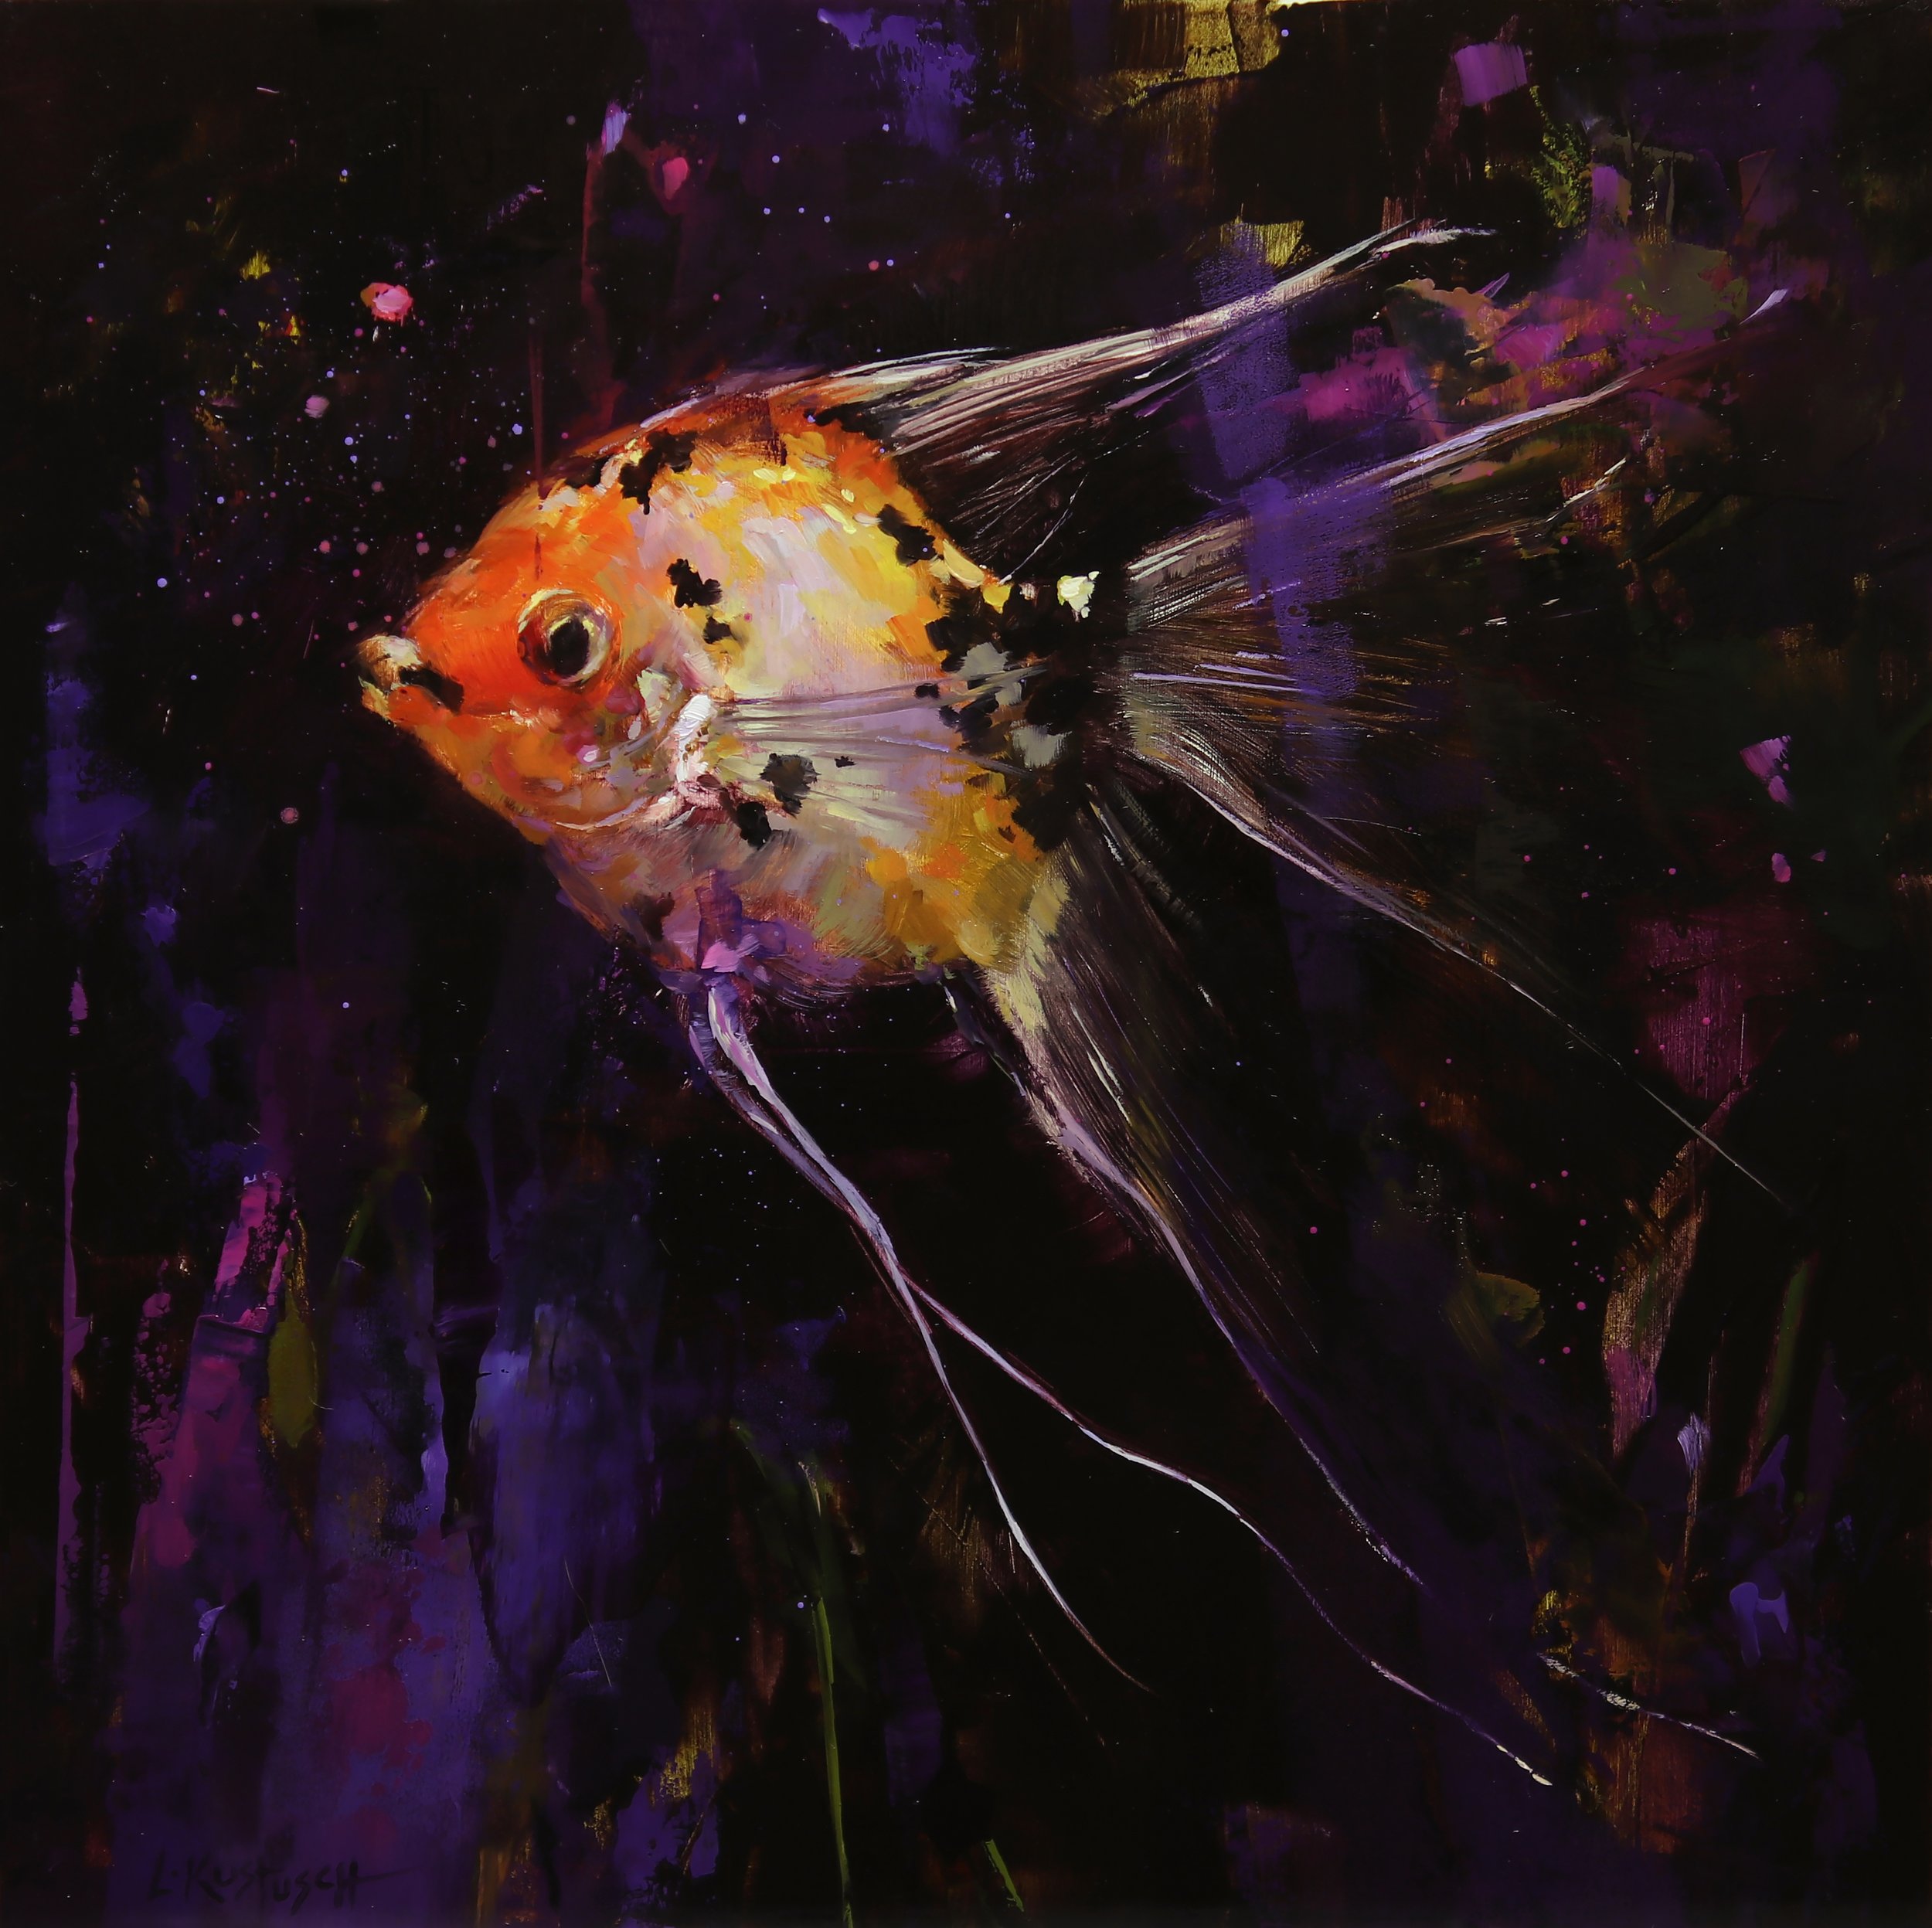 The Koi Angelfish in Shades of Amethyst by Lindsey Kustusch